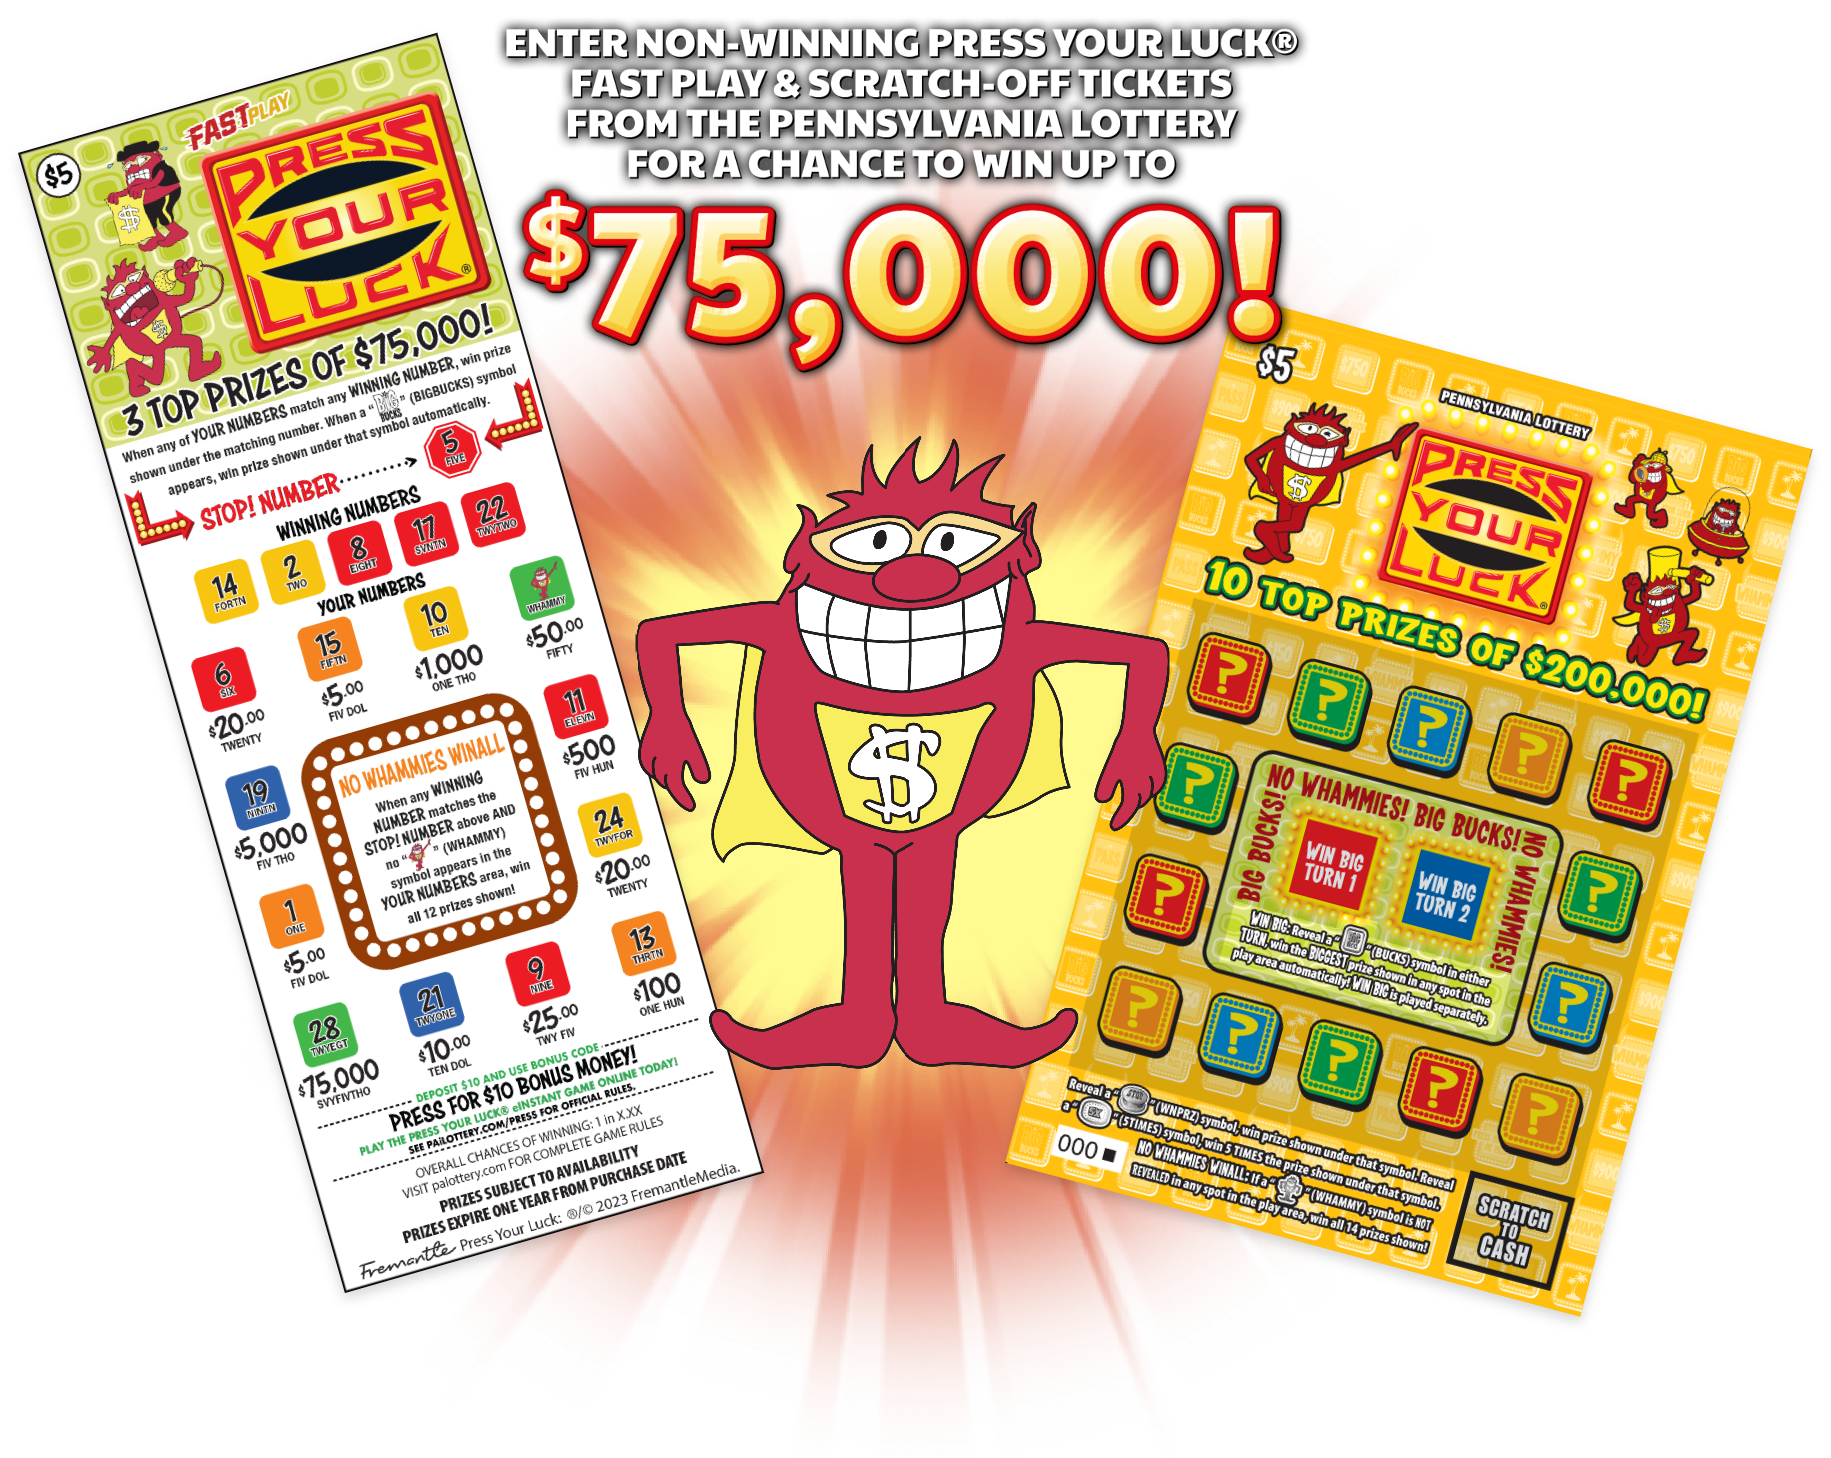 Enter non-winning PRESS YOUR LUCK® Scratch-Off and Fast-Play tickets from Pennsylvania Lottery for a chance to win up to $75,000!